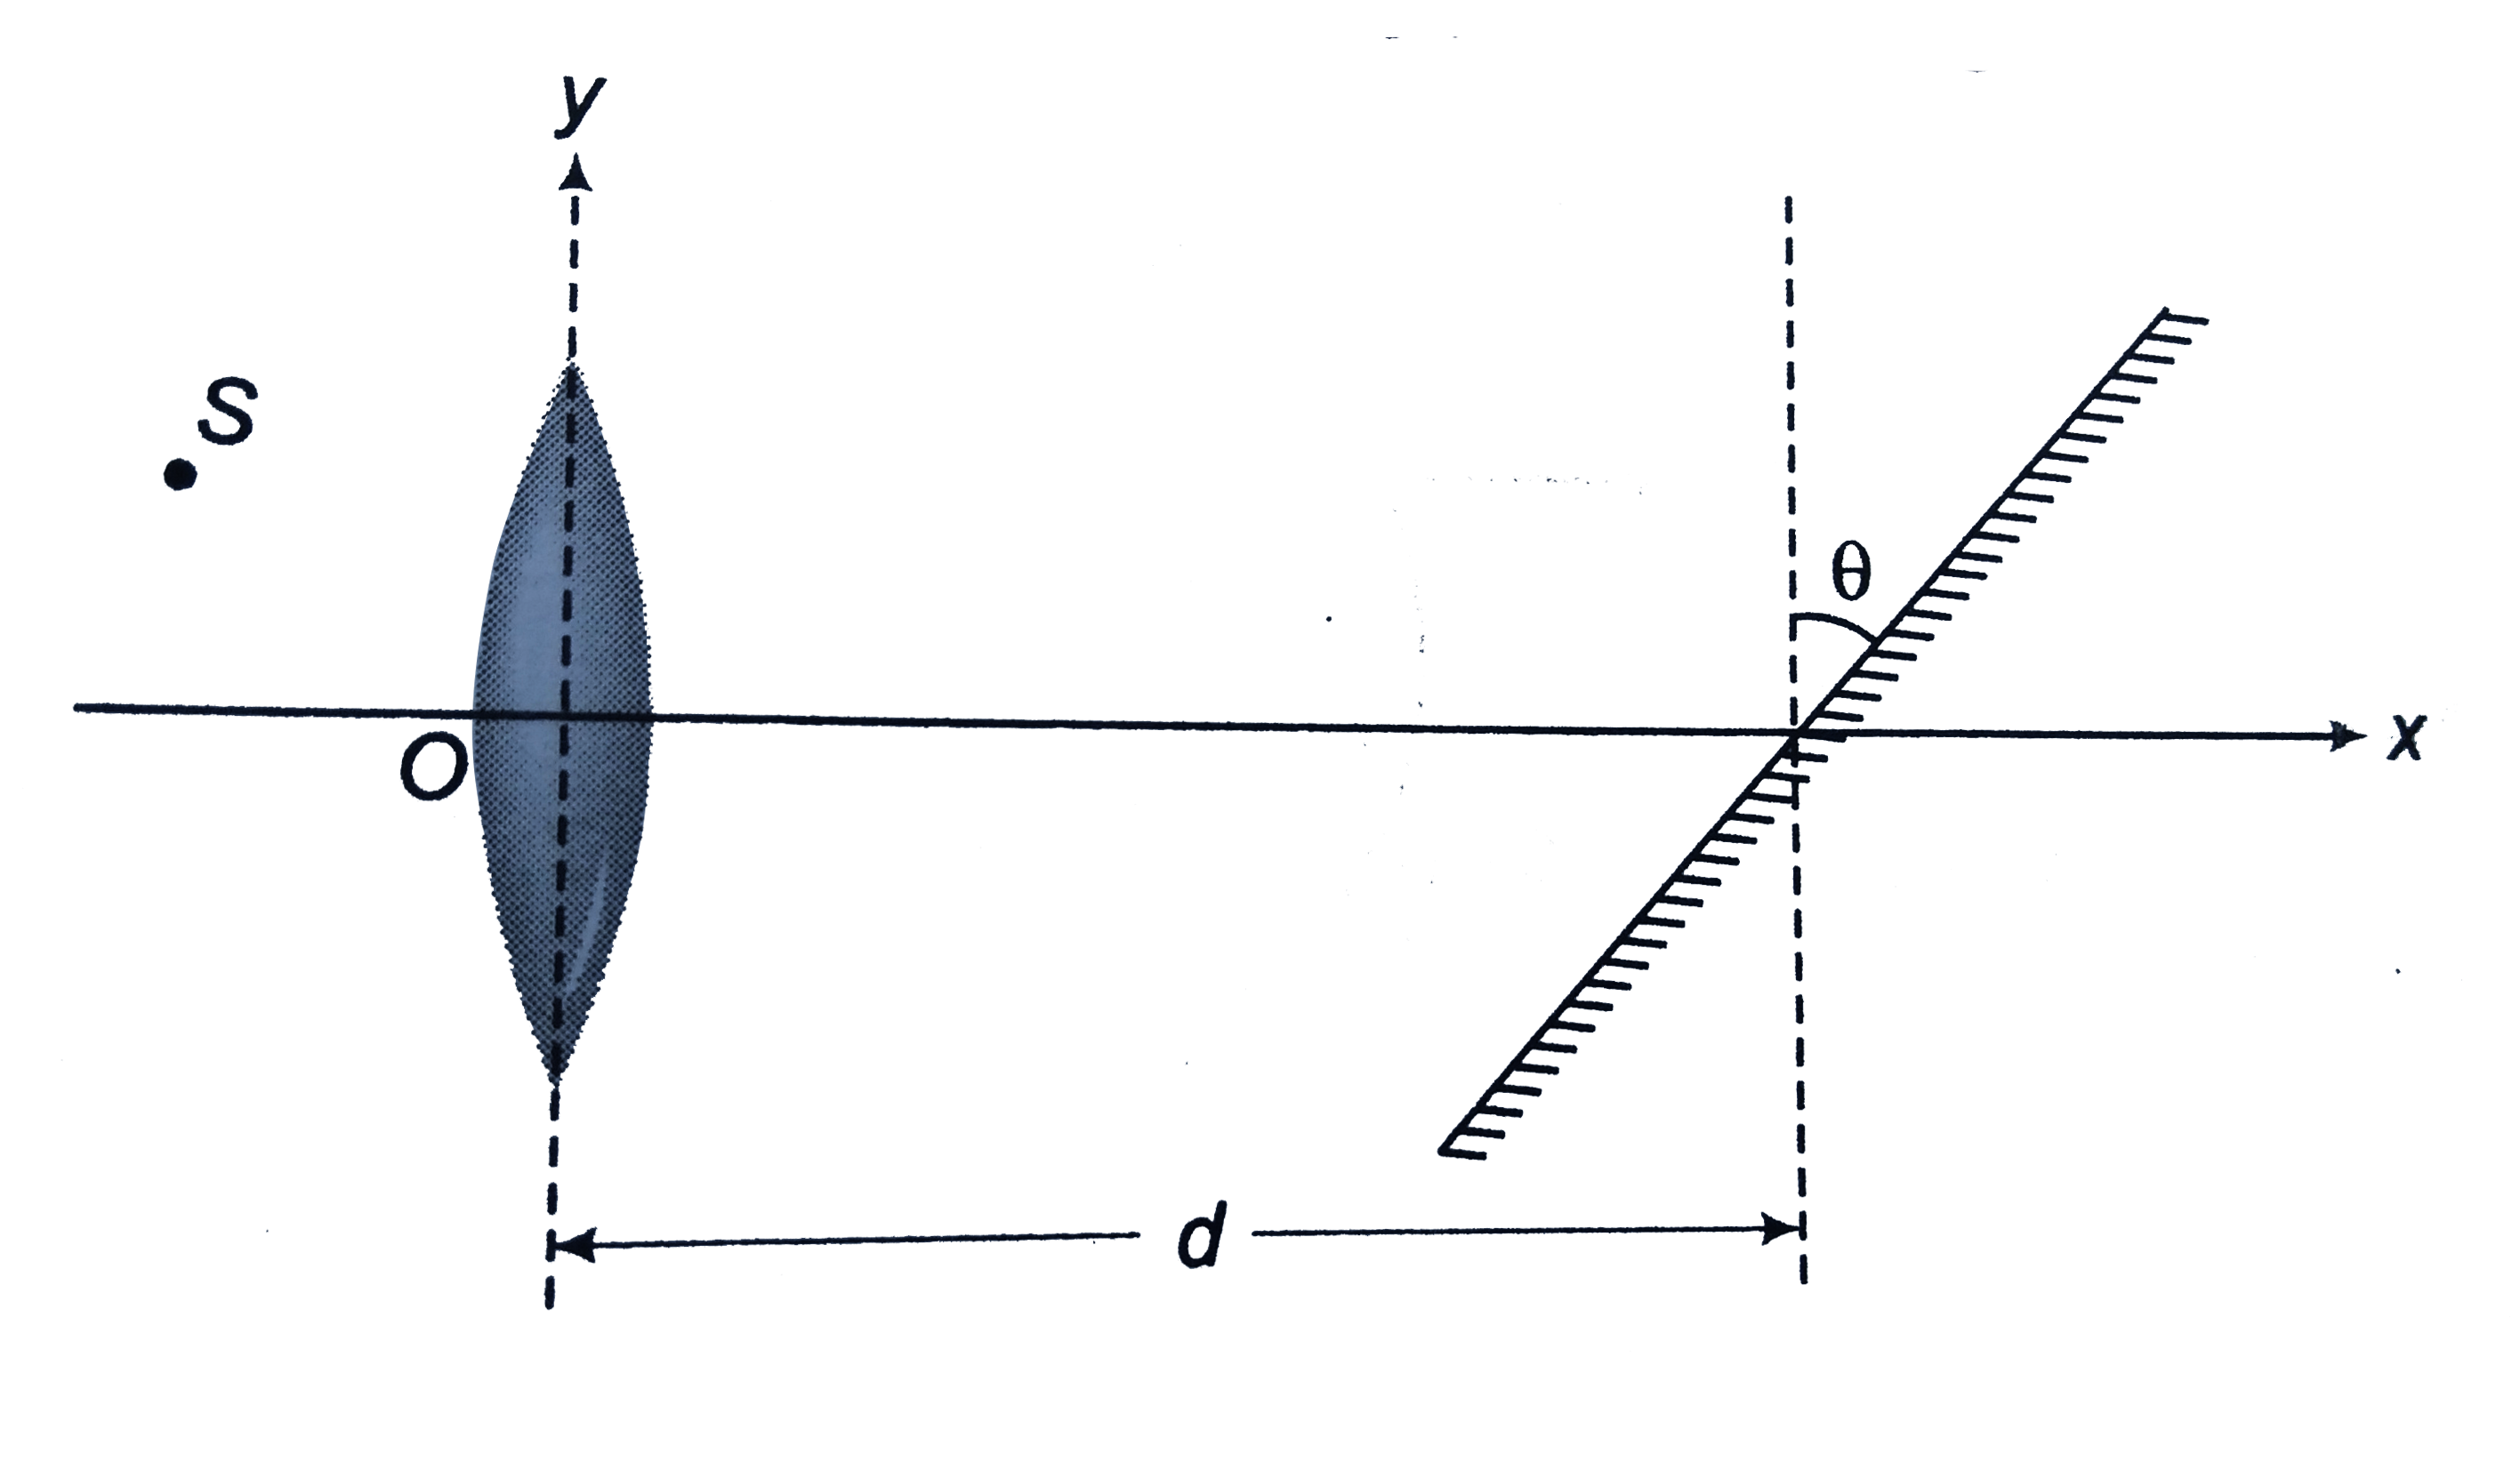 A thin converging lens of focal length f=1.5 m is placed along y-axis such that its optical centre coincides with the origin. A small light source S is placed at (-2.0 m,0.1 m). Where should a plane mirror inclined at an angle theta, tan theta=0.3 be placed such that y-coordinate of final image is 0.3 m,  i.e. find d. Also find x-coordinate of final image.